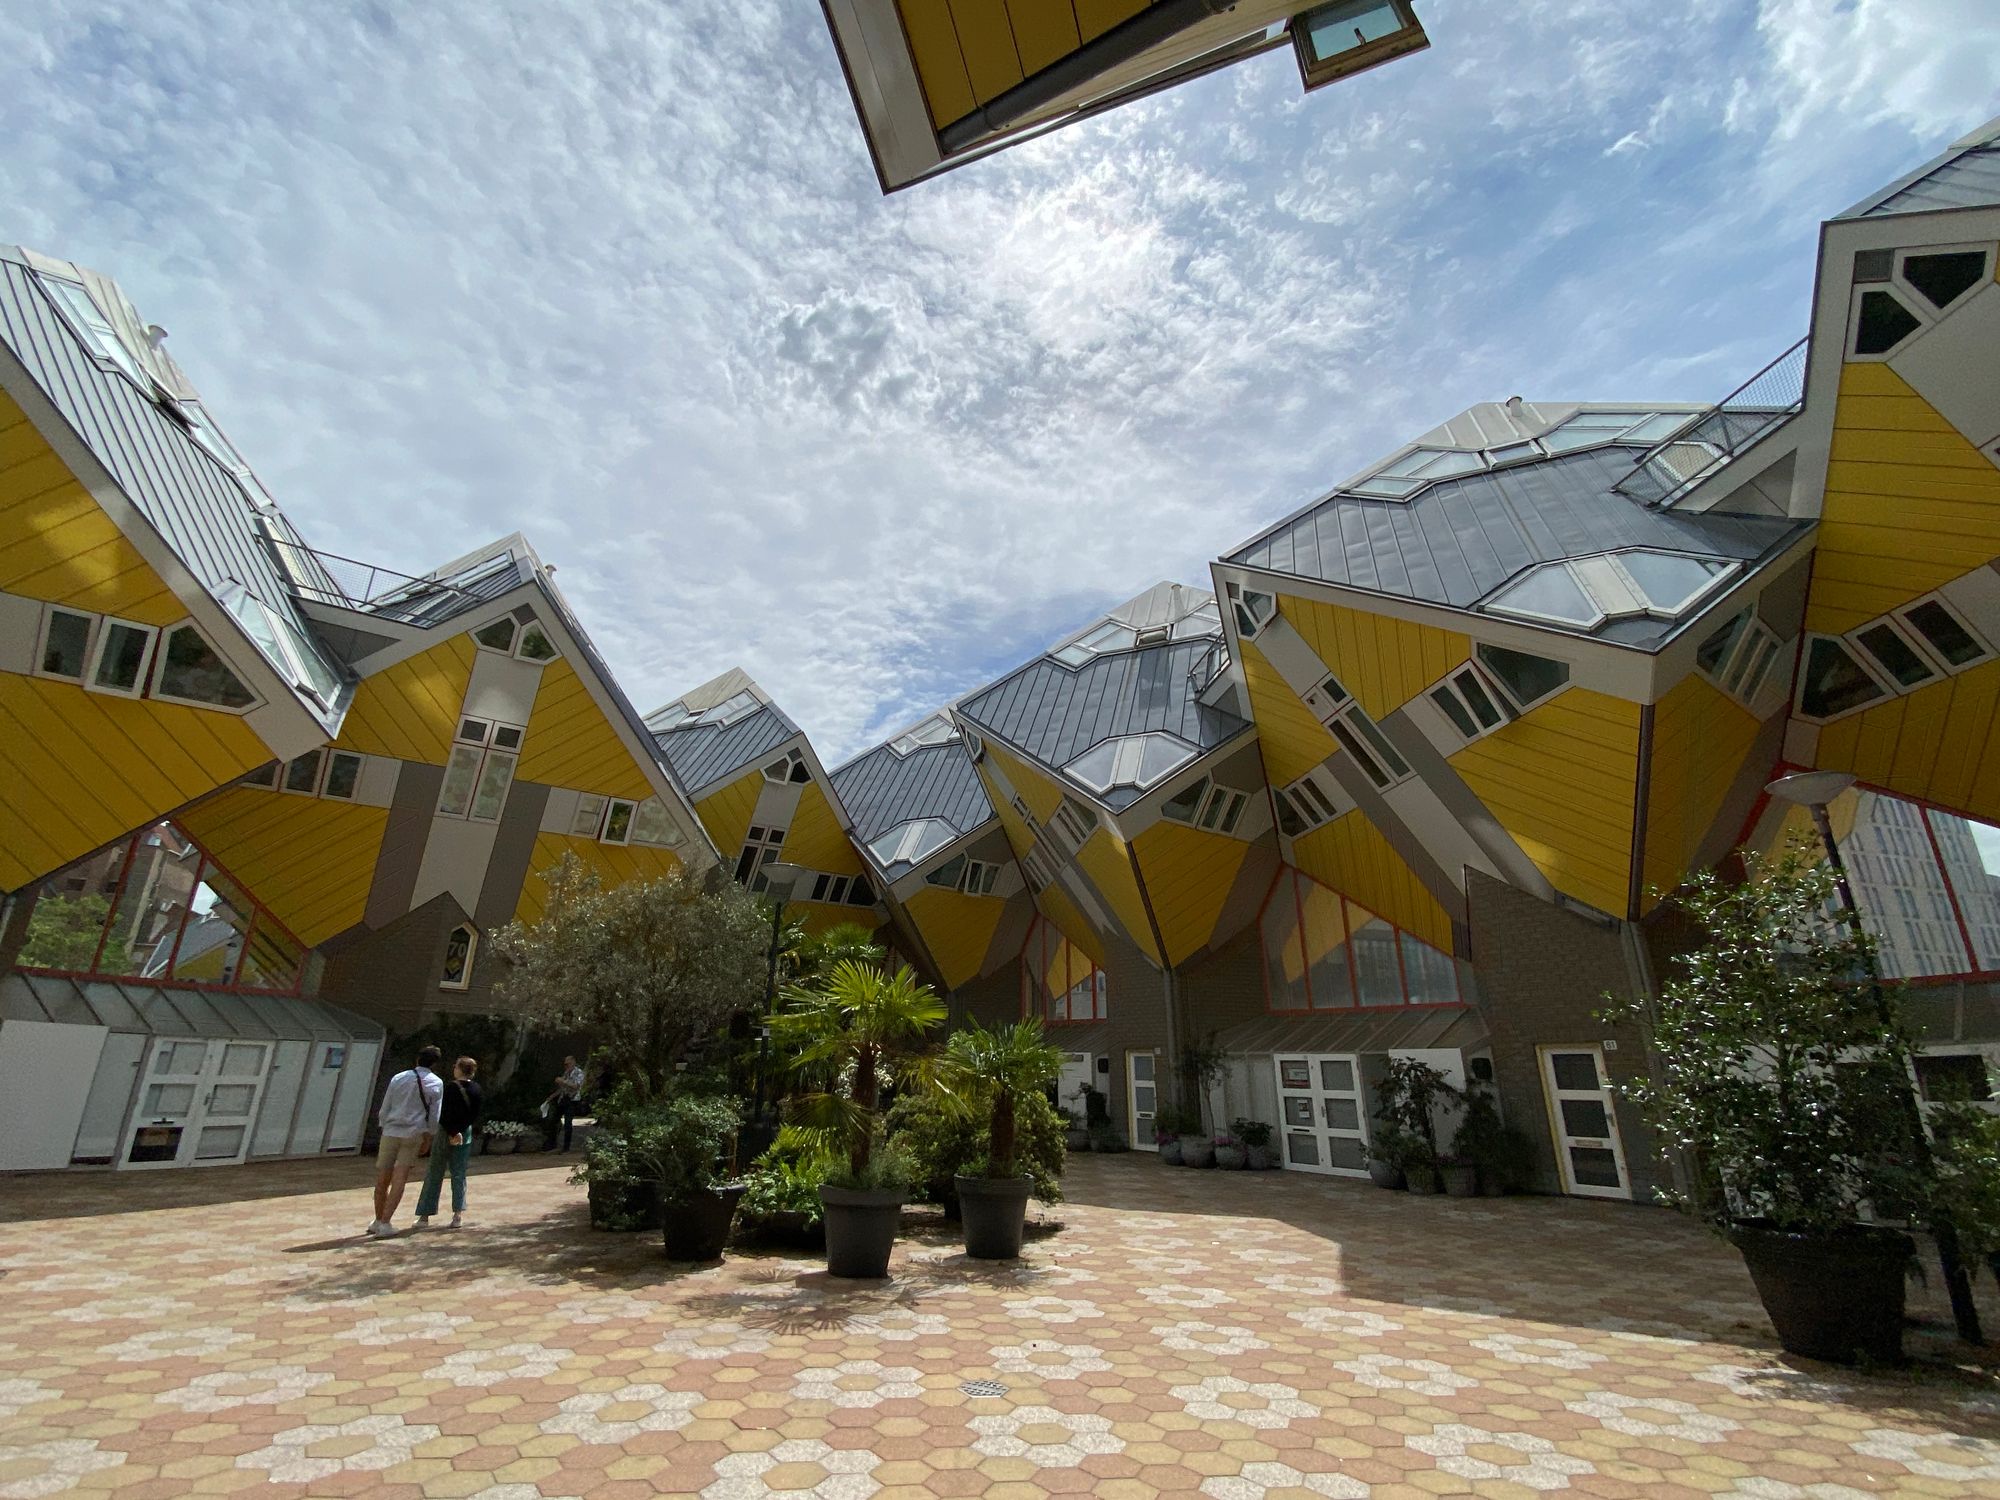 The Cube Houses in Rotterdam, Netherlands